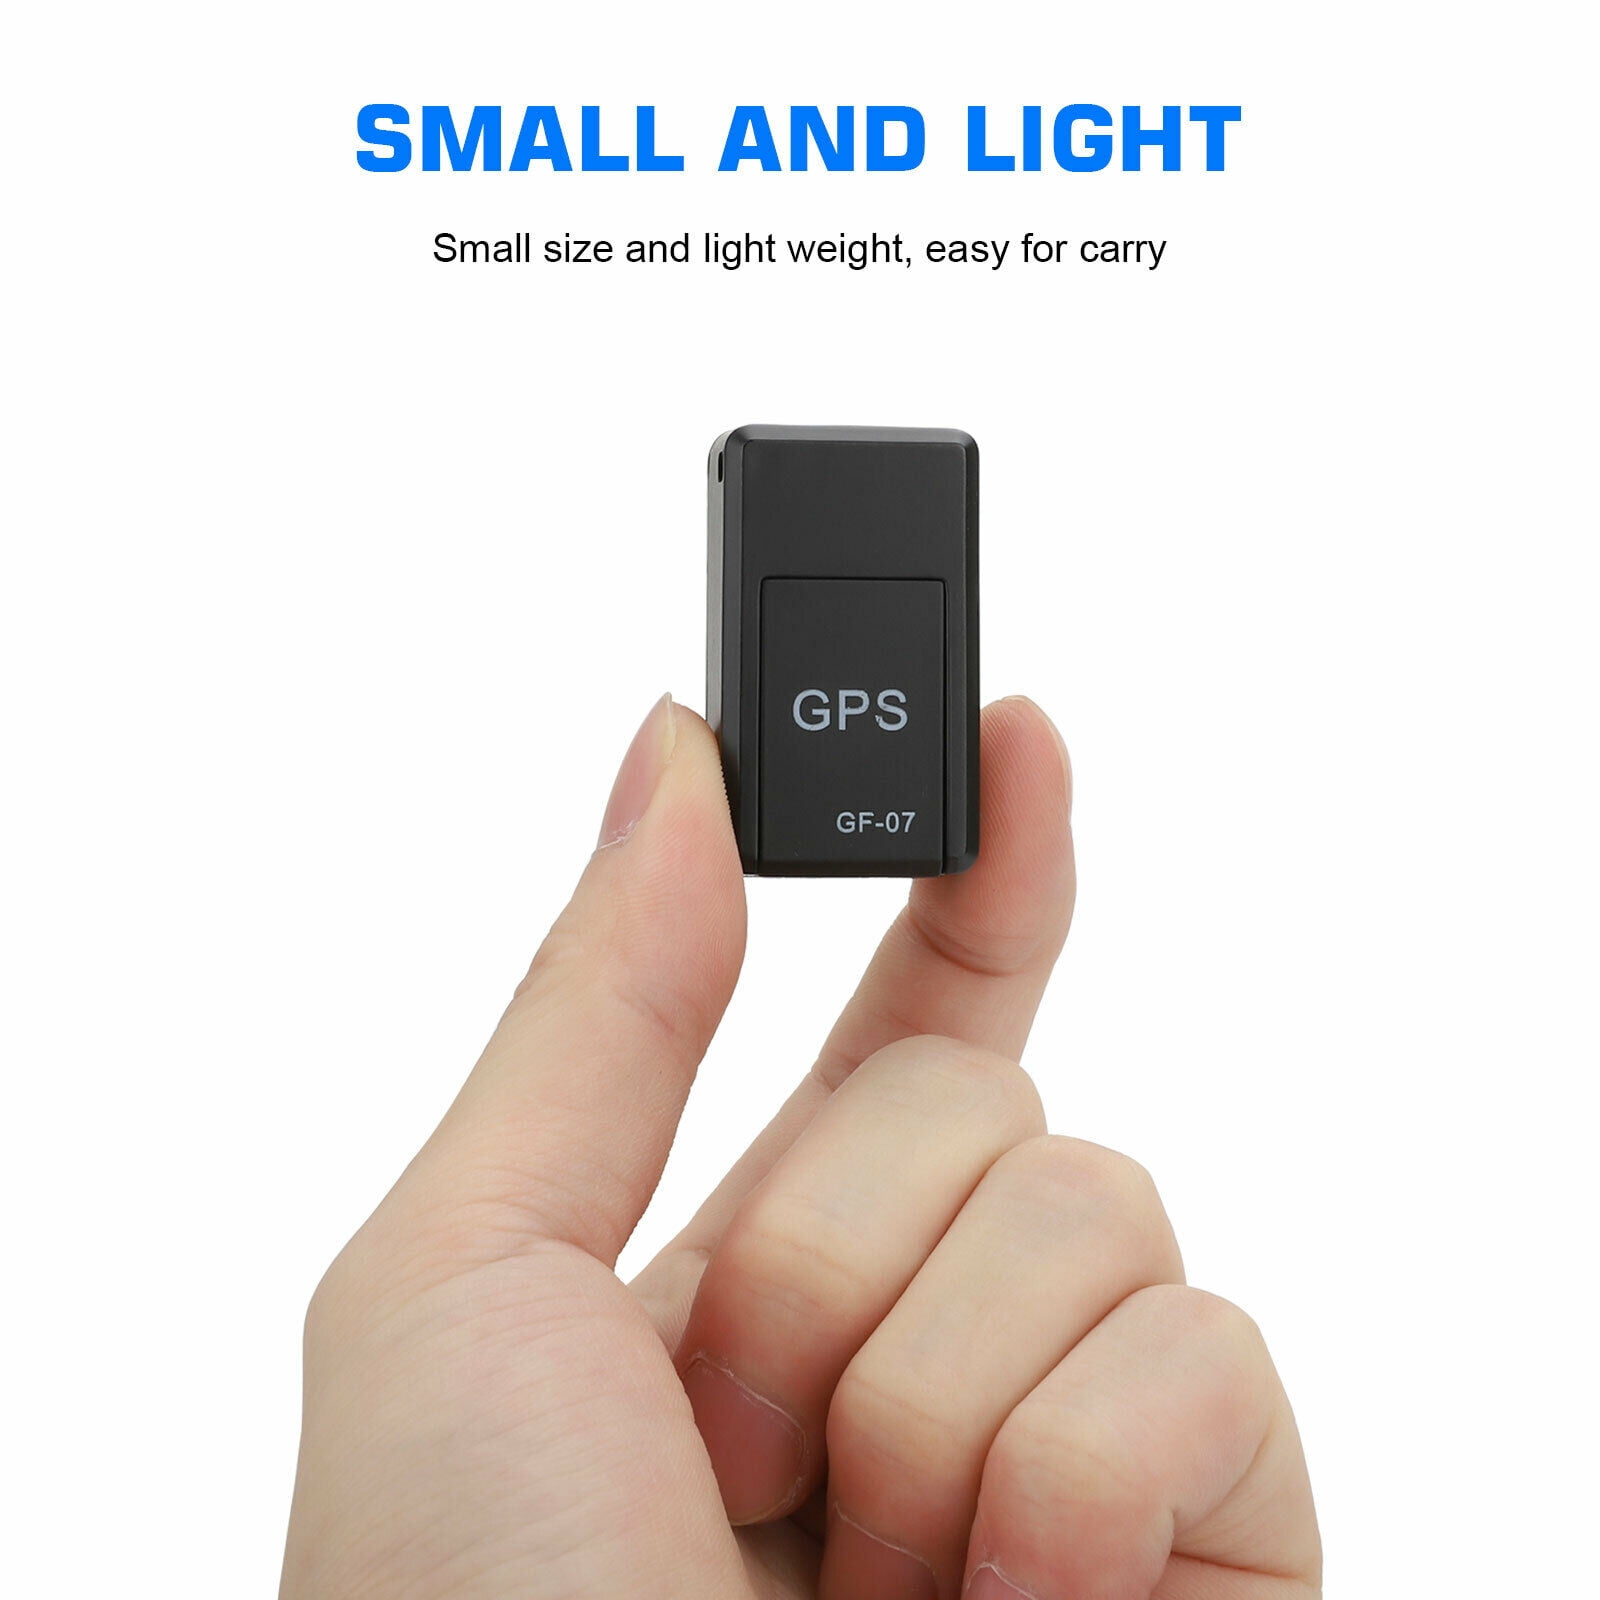 Zeerkeer Portable Real-Time GPS Locator for Vehicles Persons Mini GPS Tracker Assets Kids Cars Hidden Tracking Device with Geo-Fence SOS Alarm Personal Tracking TK902 